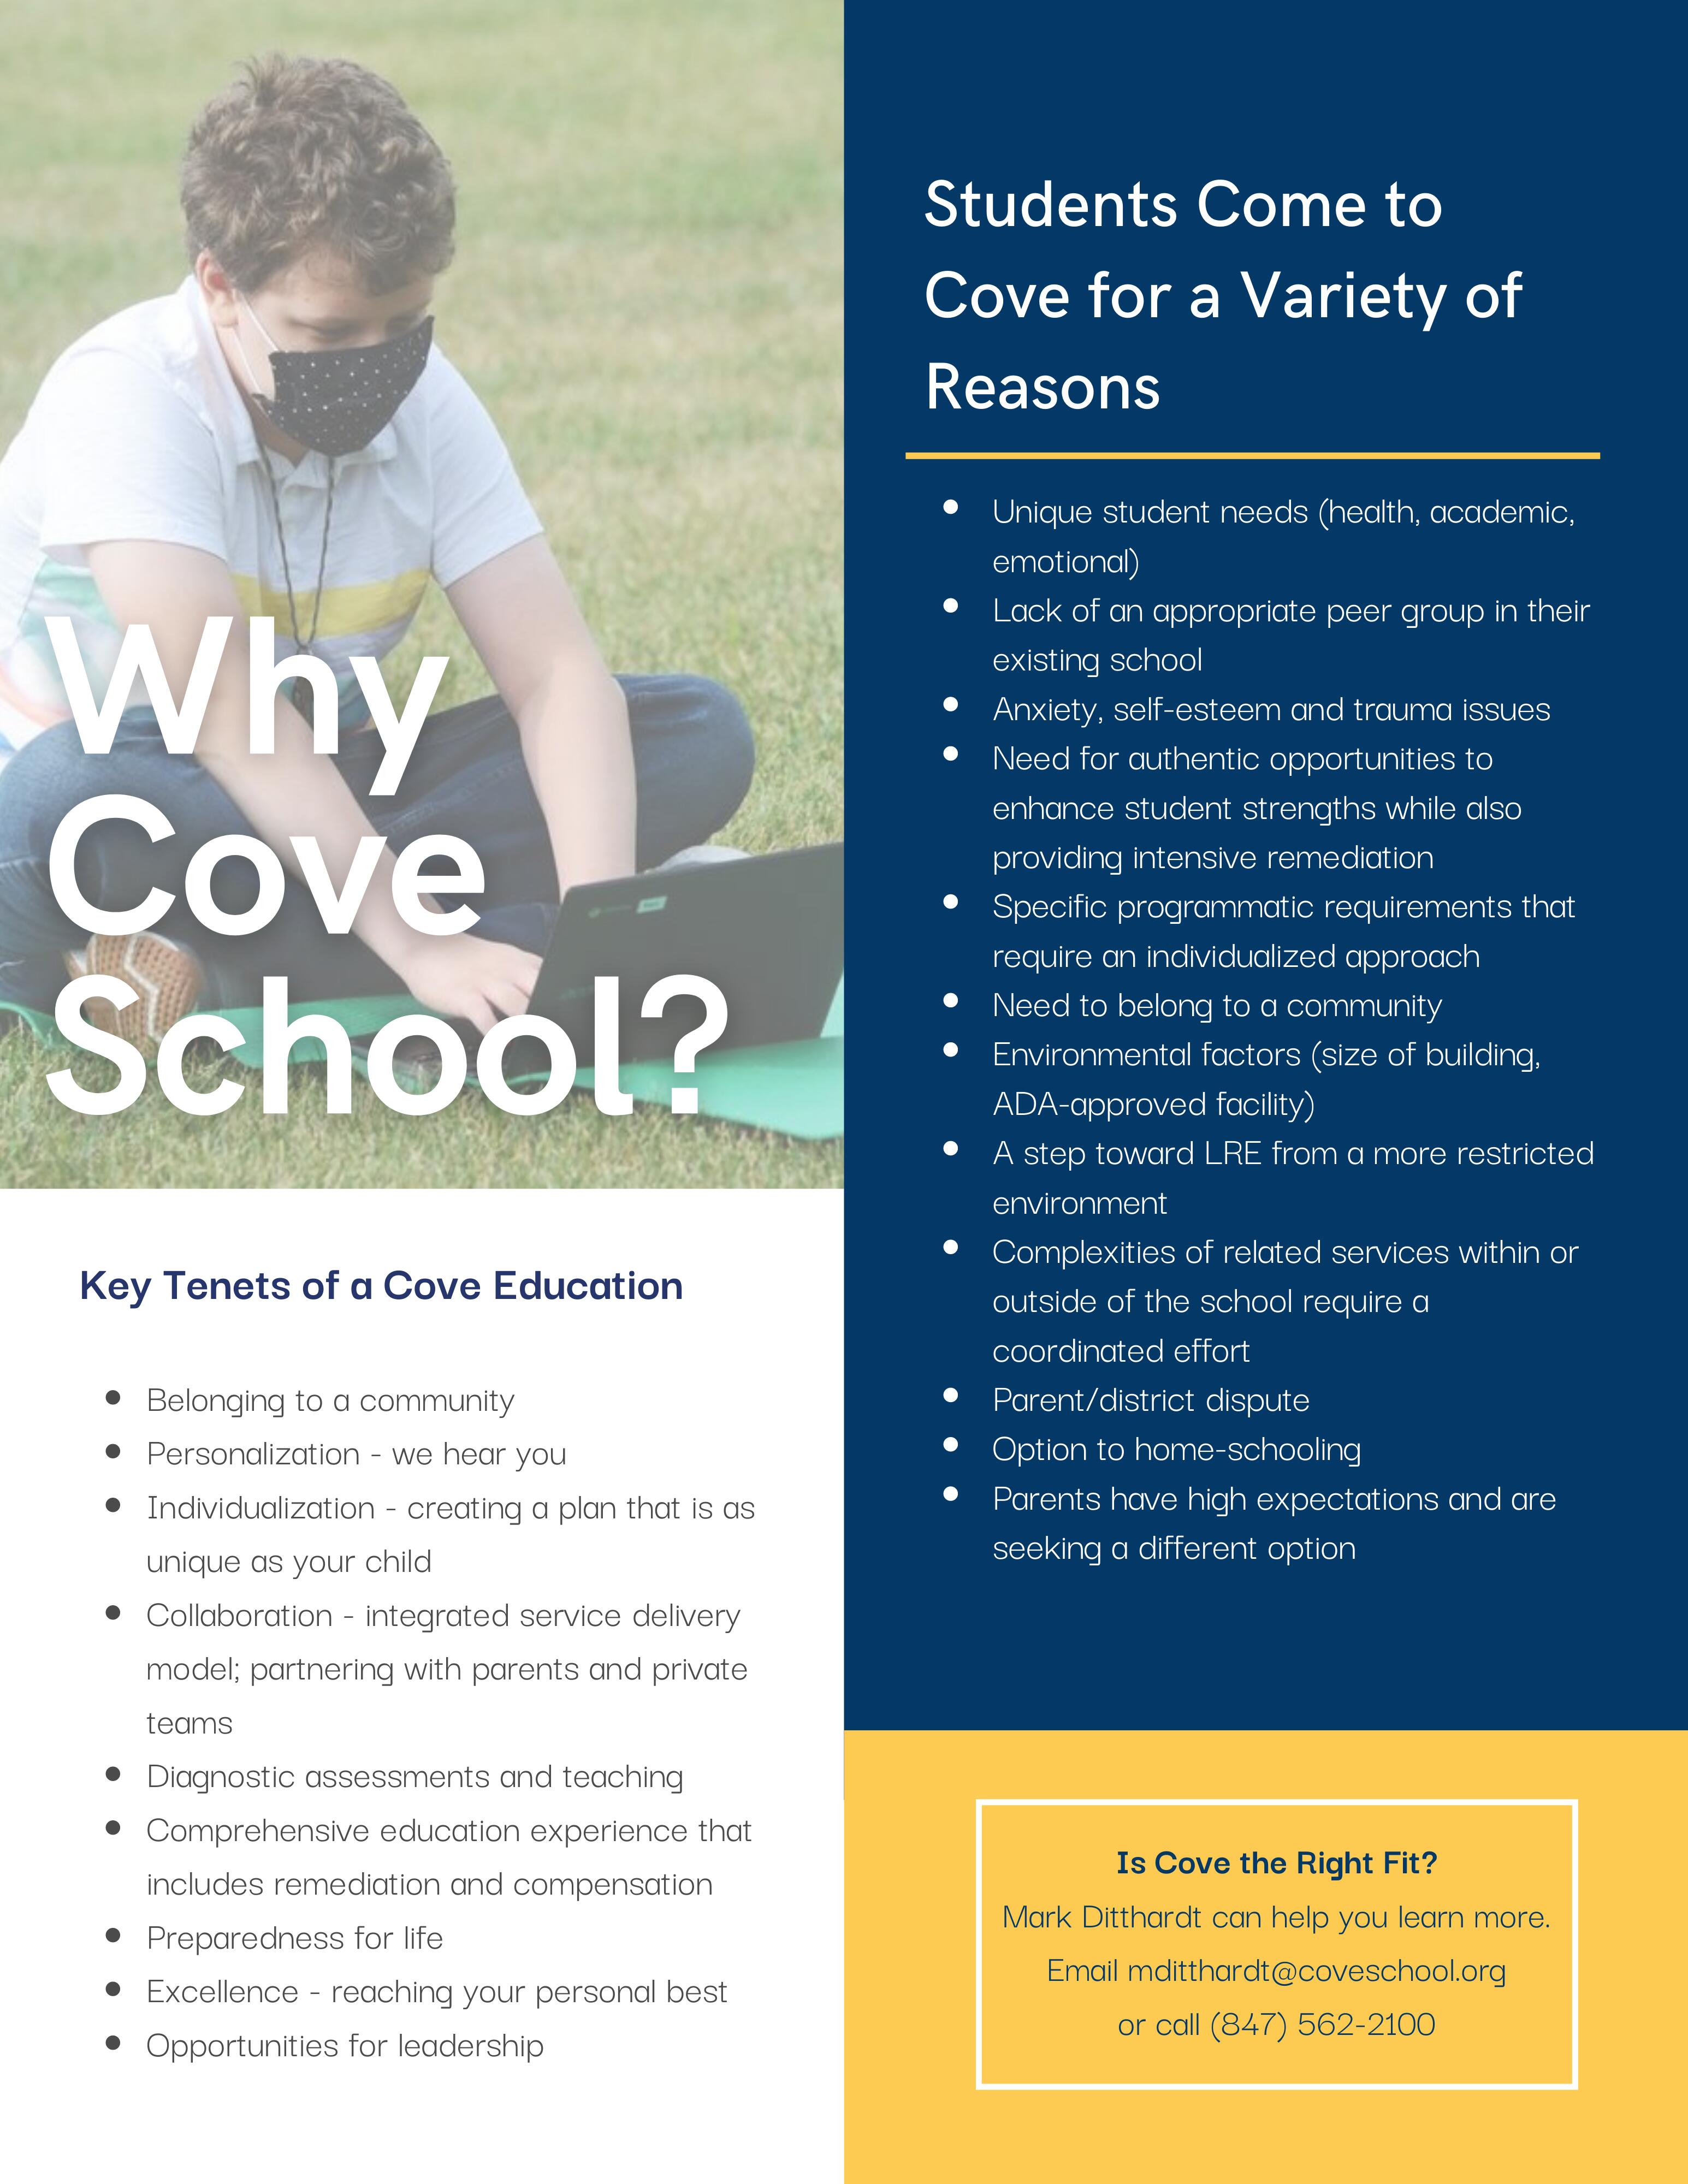 Why Cove School? Students come to Cove for a variety of different reasons. 